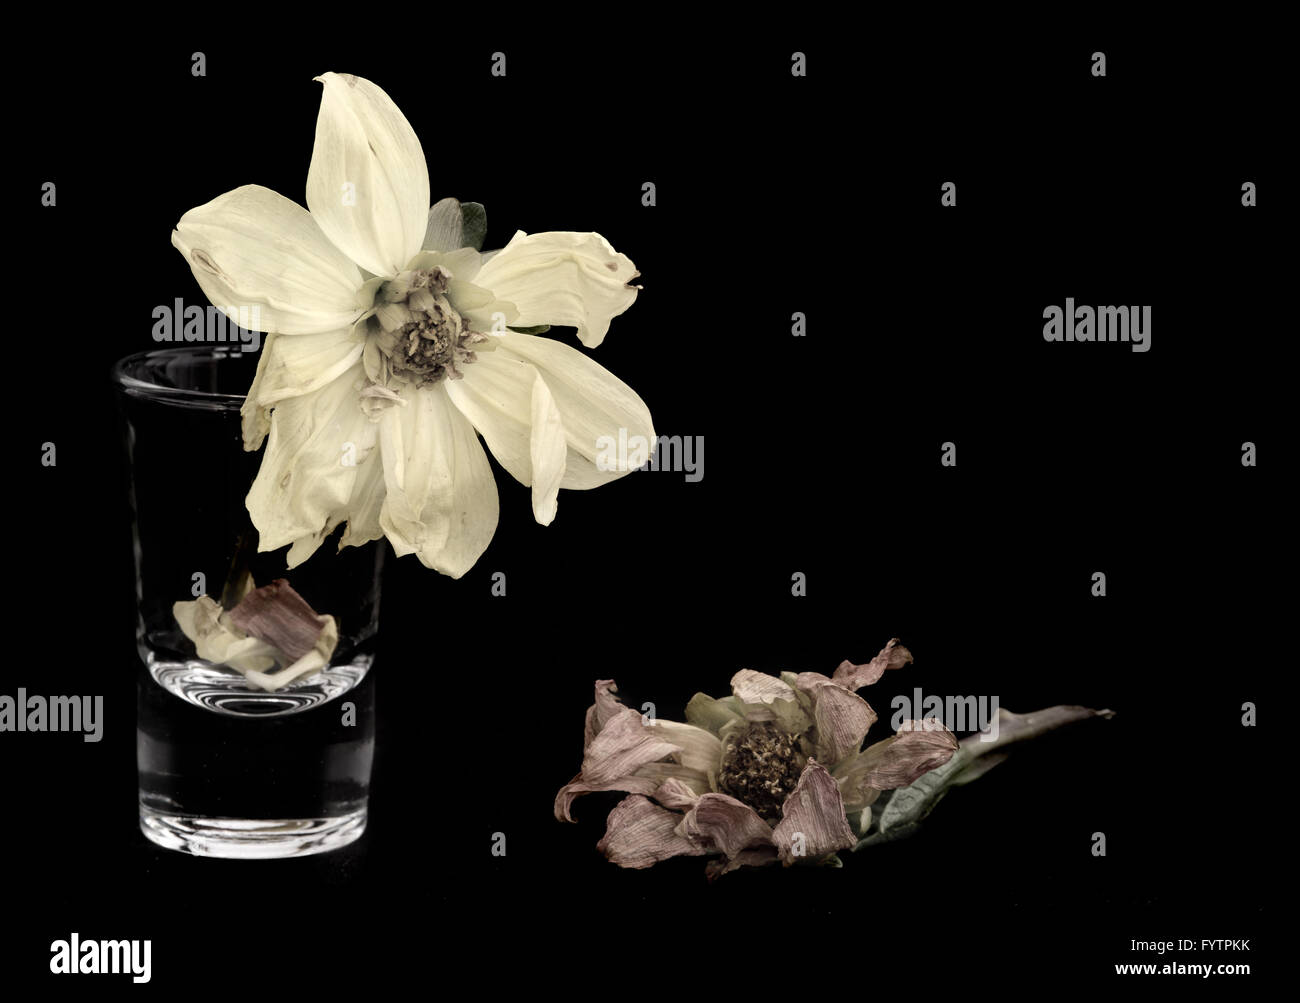 Yellow and orange wither dying dahlia flowers isolated on a black background Stock Photo